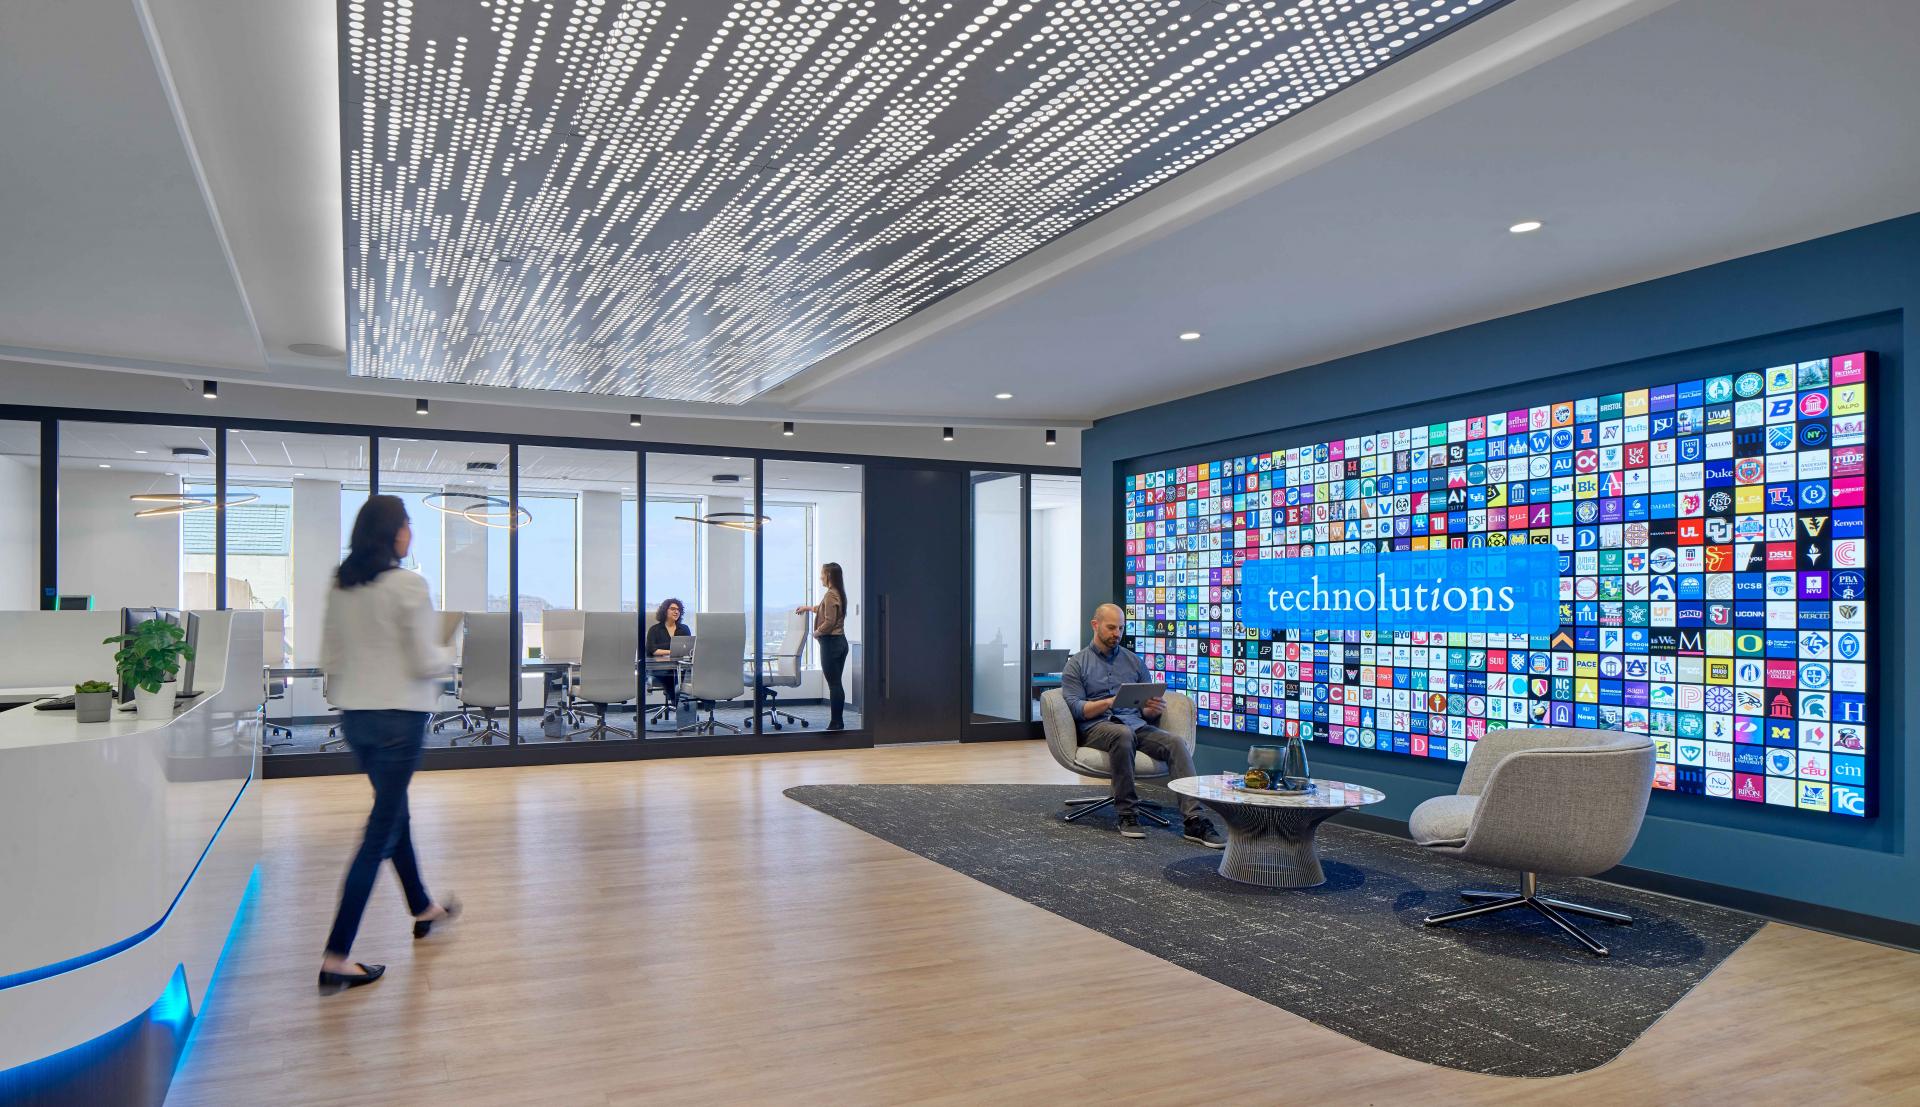 Technolutions  Tasked with concurrently designing bi-coastal offices reflecting this client’s state-of-the-art product and bold mission, Svigals + Partners...  View Project